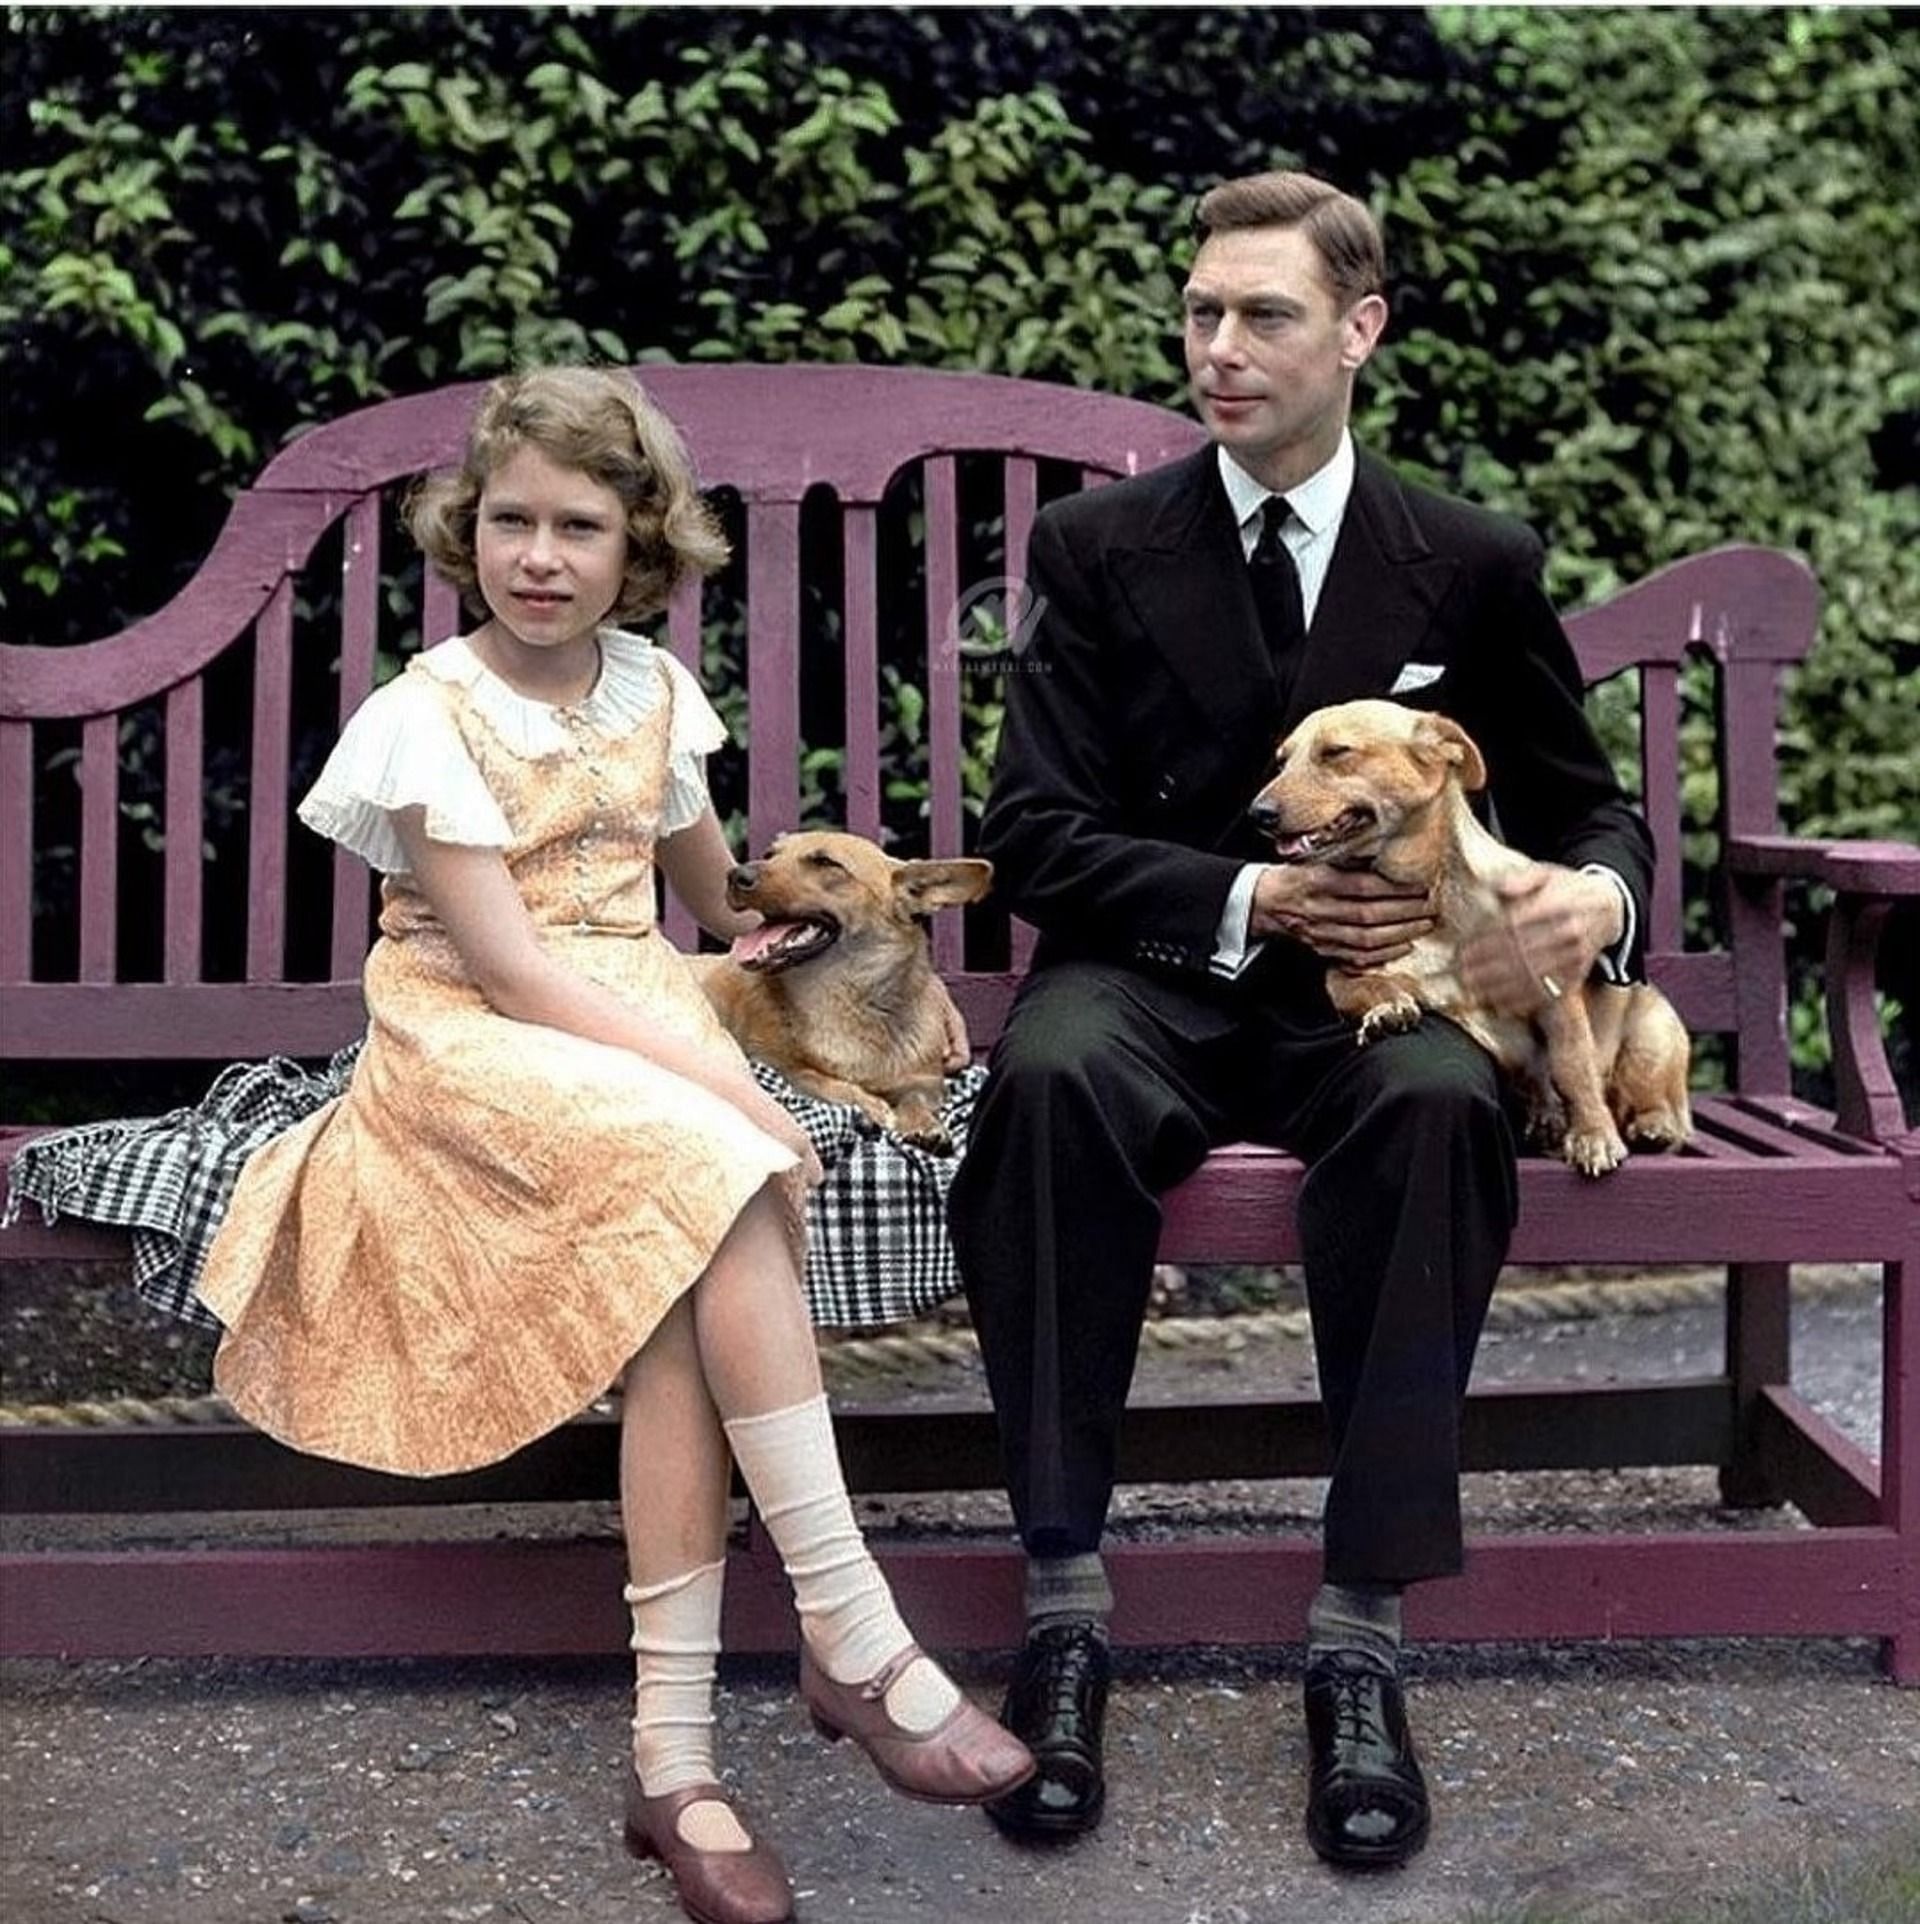 Young Elizabeth with King George VI with her dog. (Image via Twitter)